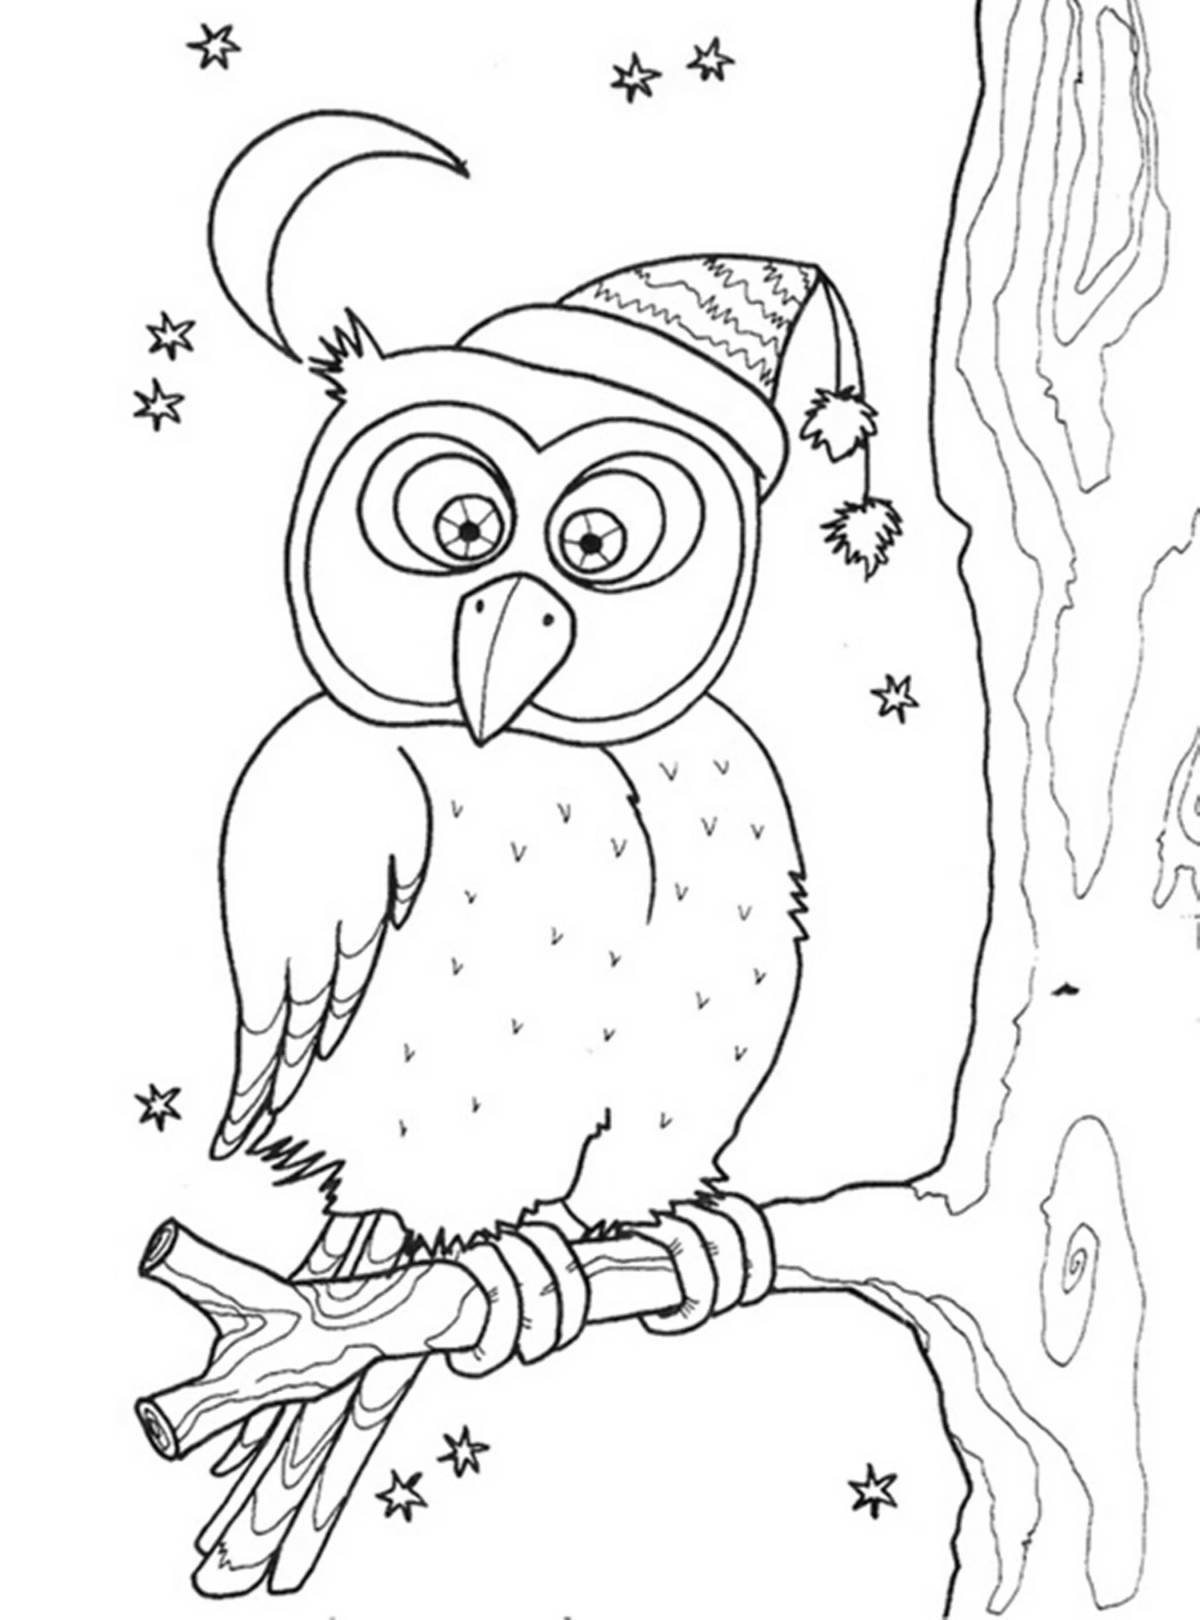 Coloring page festive christmas owl